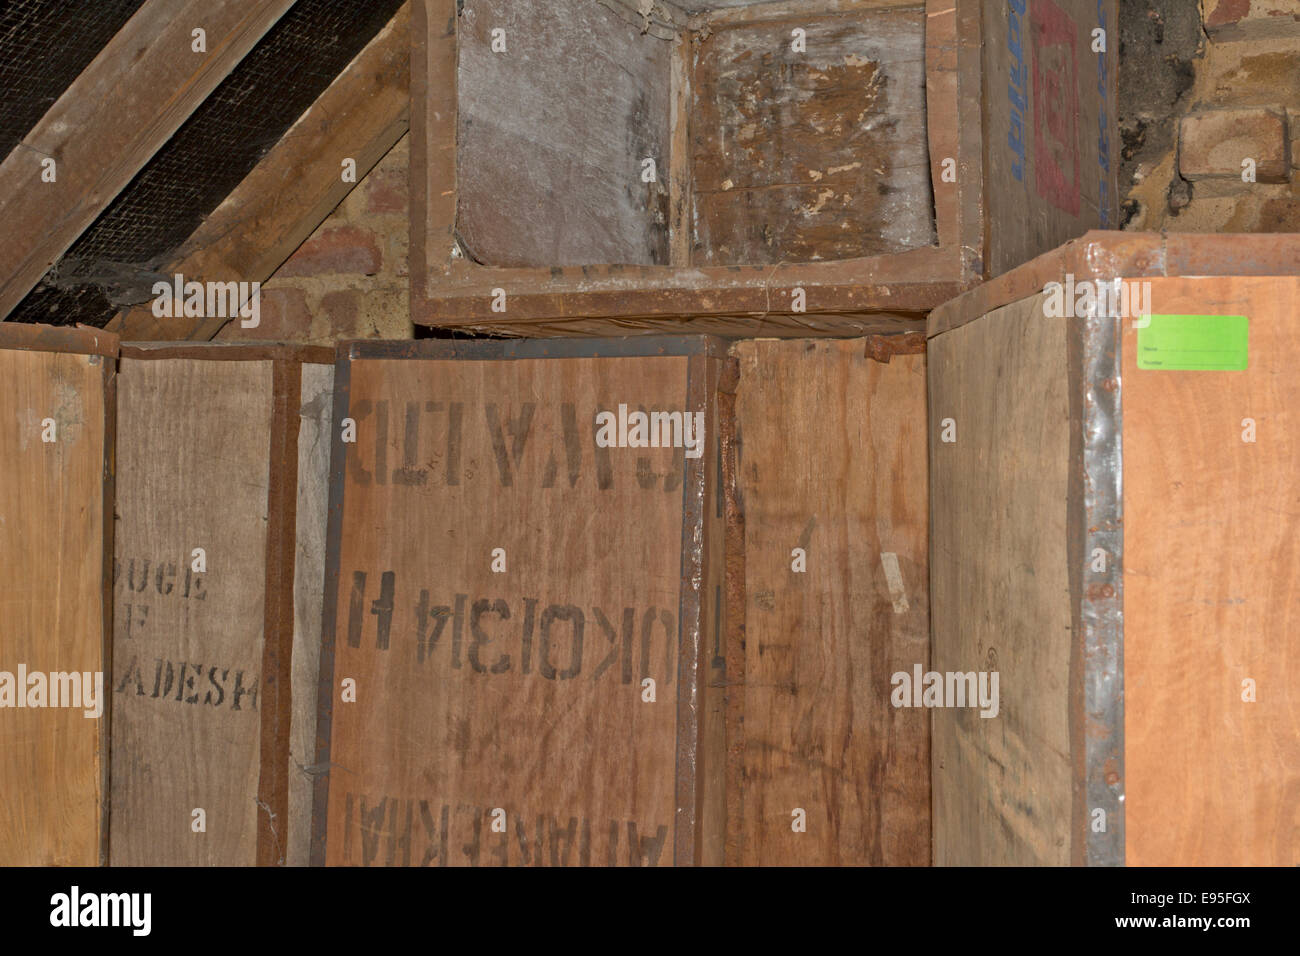 Old tea chests in a house loft Stock Photo